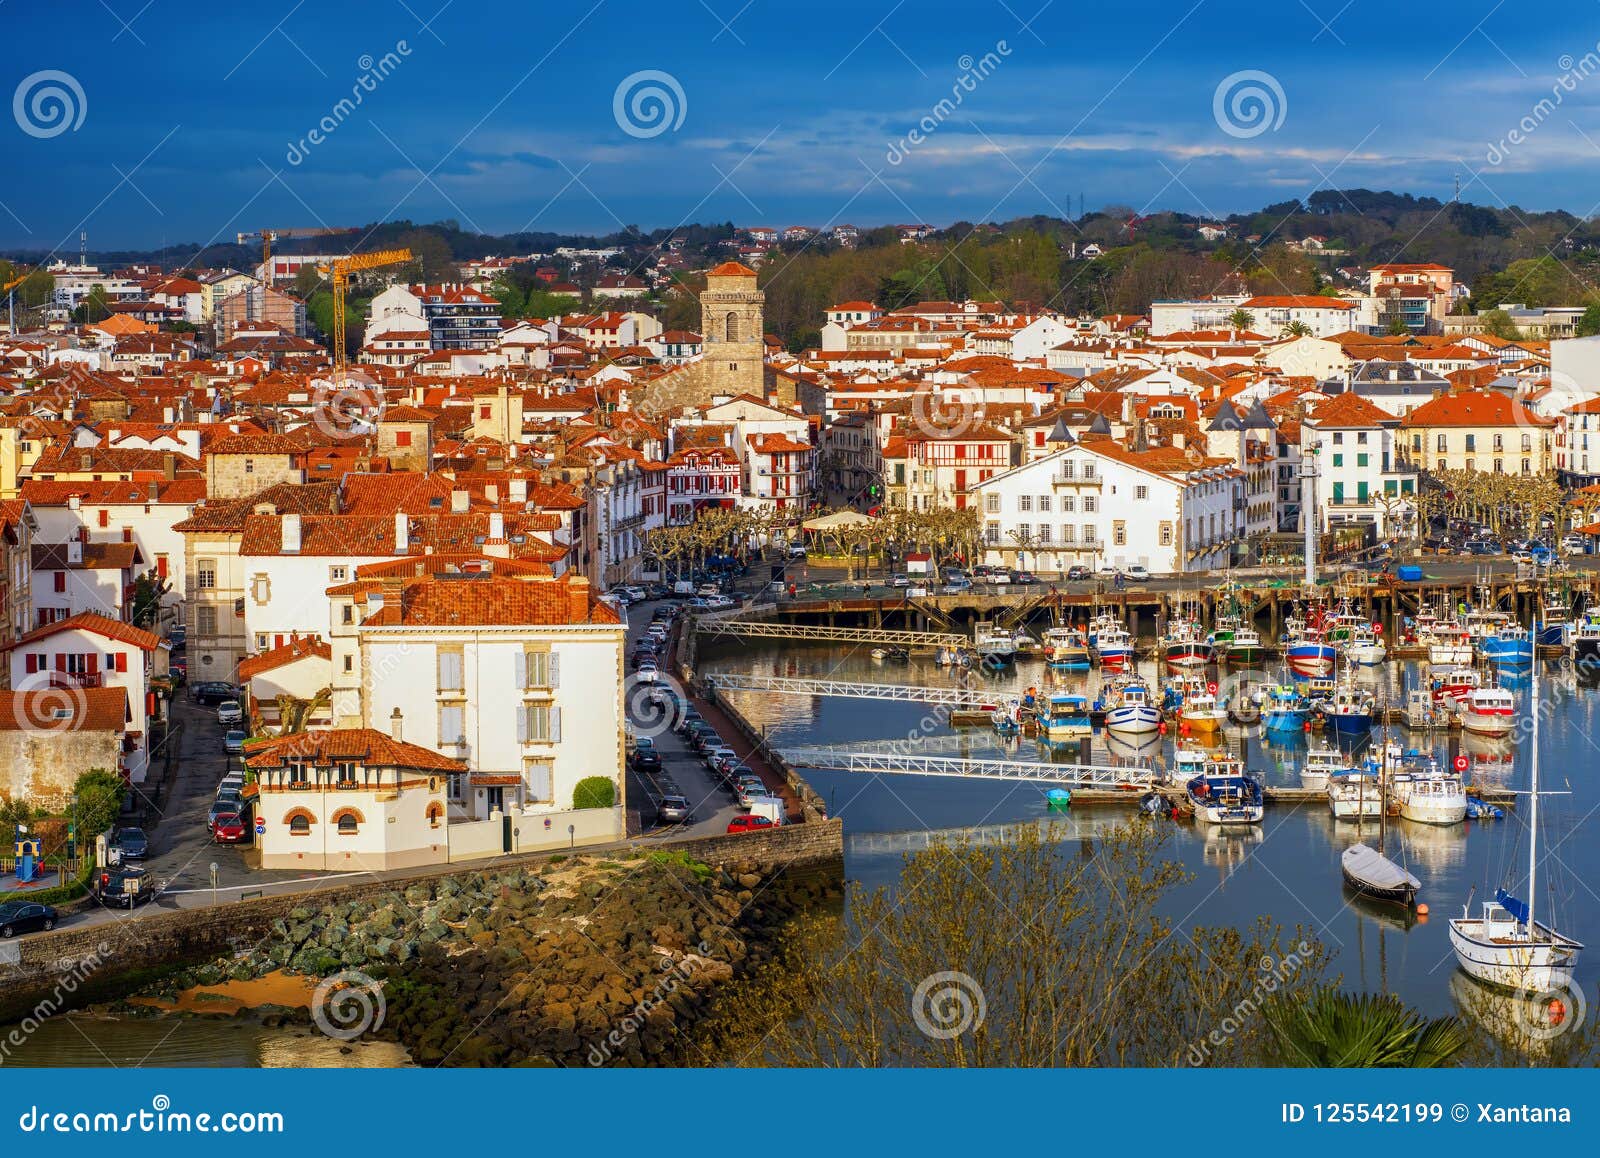 traditional basque houses in the old town of saint jean de luz,